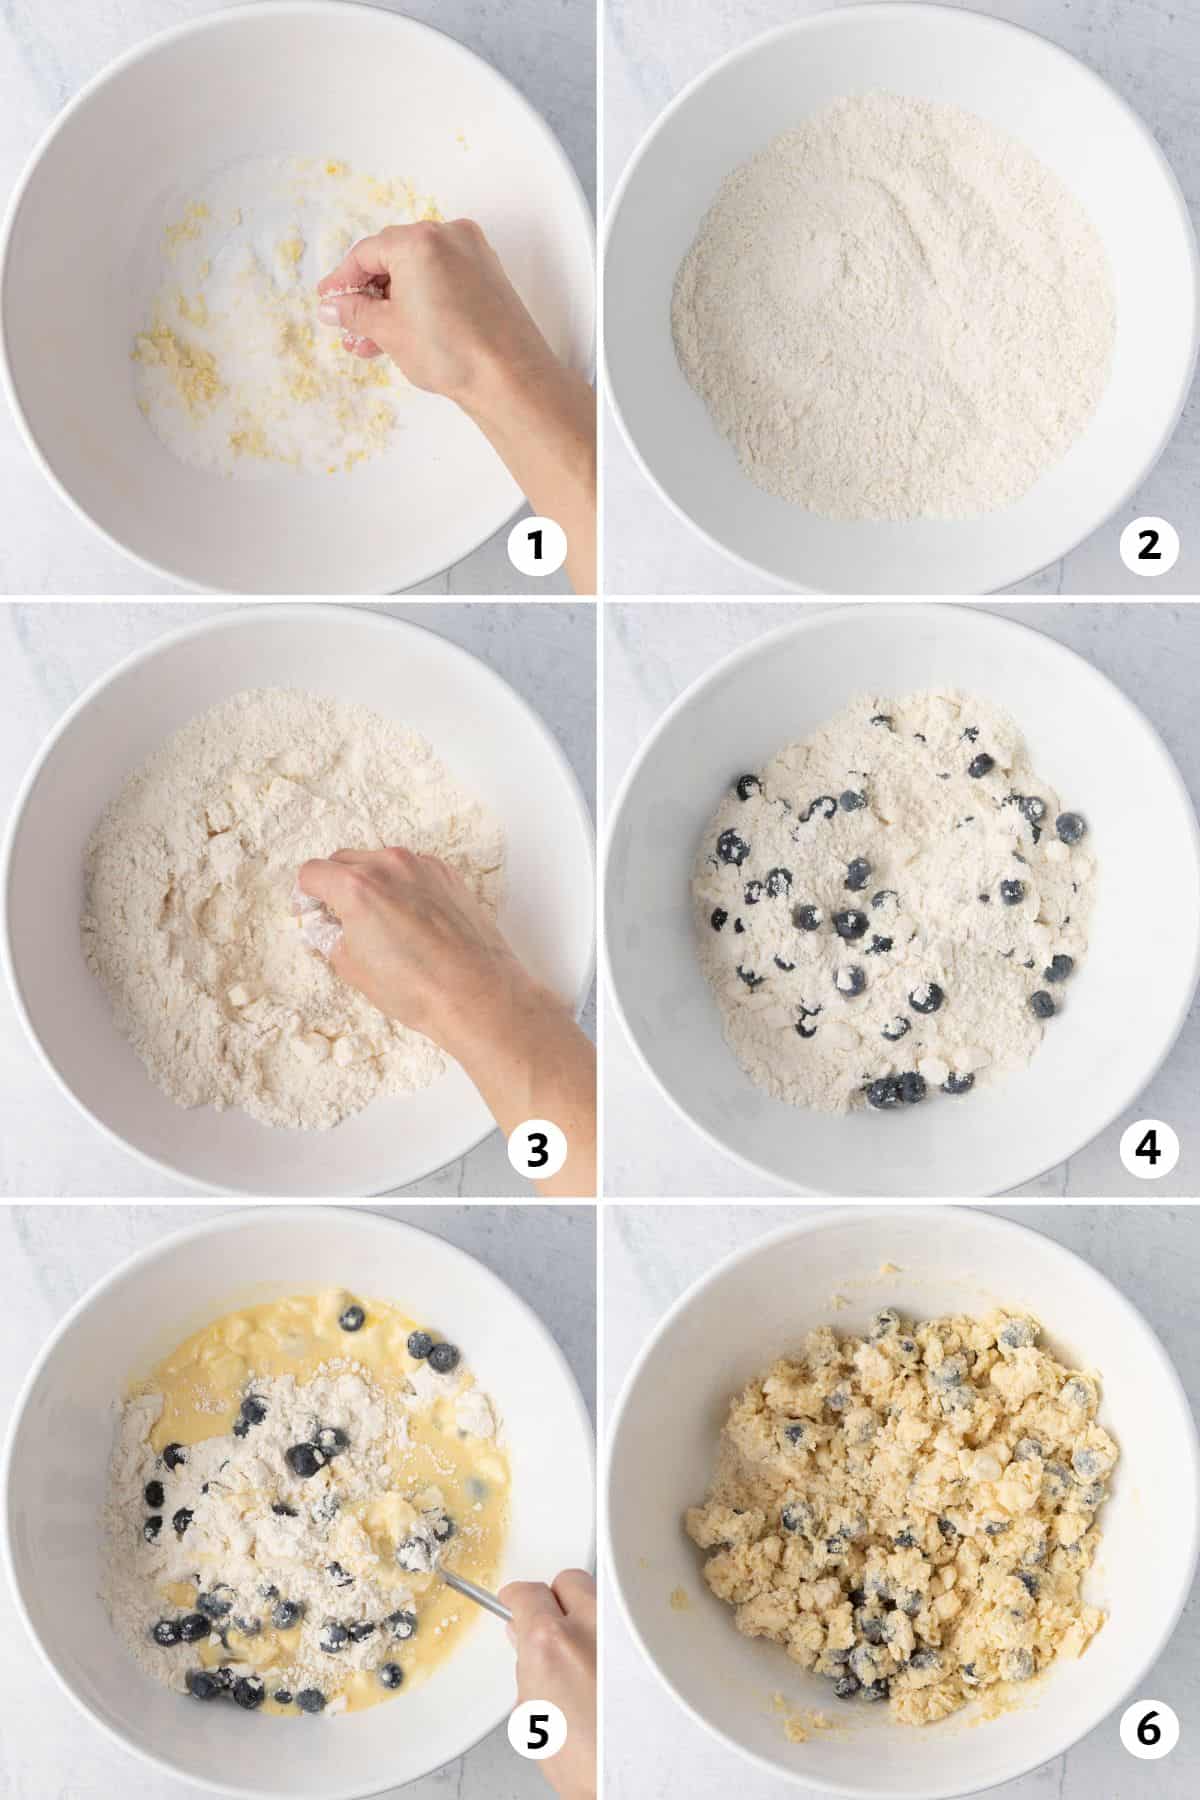 6 image collage making dough in one bowl: hand in bowl massaging lemon zest with sugar, 2- dry ingredients added, 3- hand rubbing butter into flour mixture, 4- blueberries folded in, 5- fork starting to combined wet and dry together, 6- combined completely.